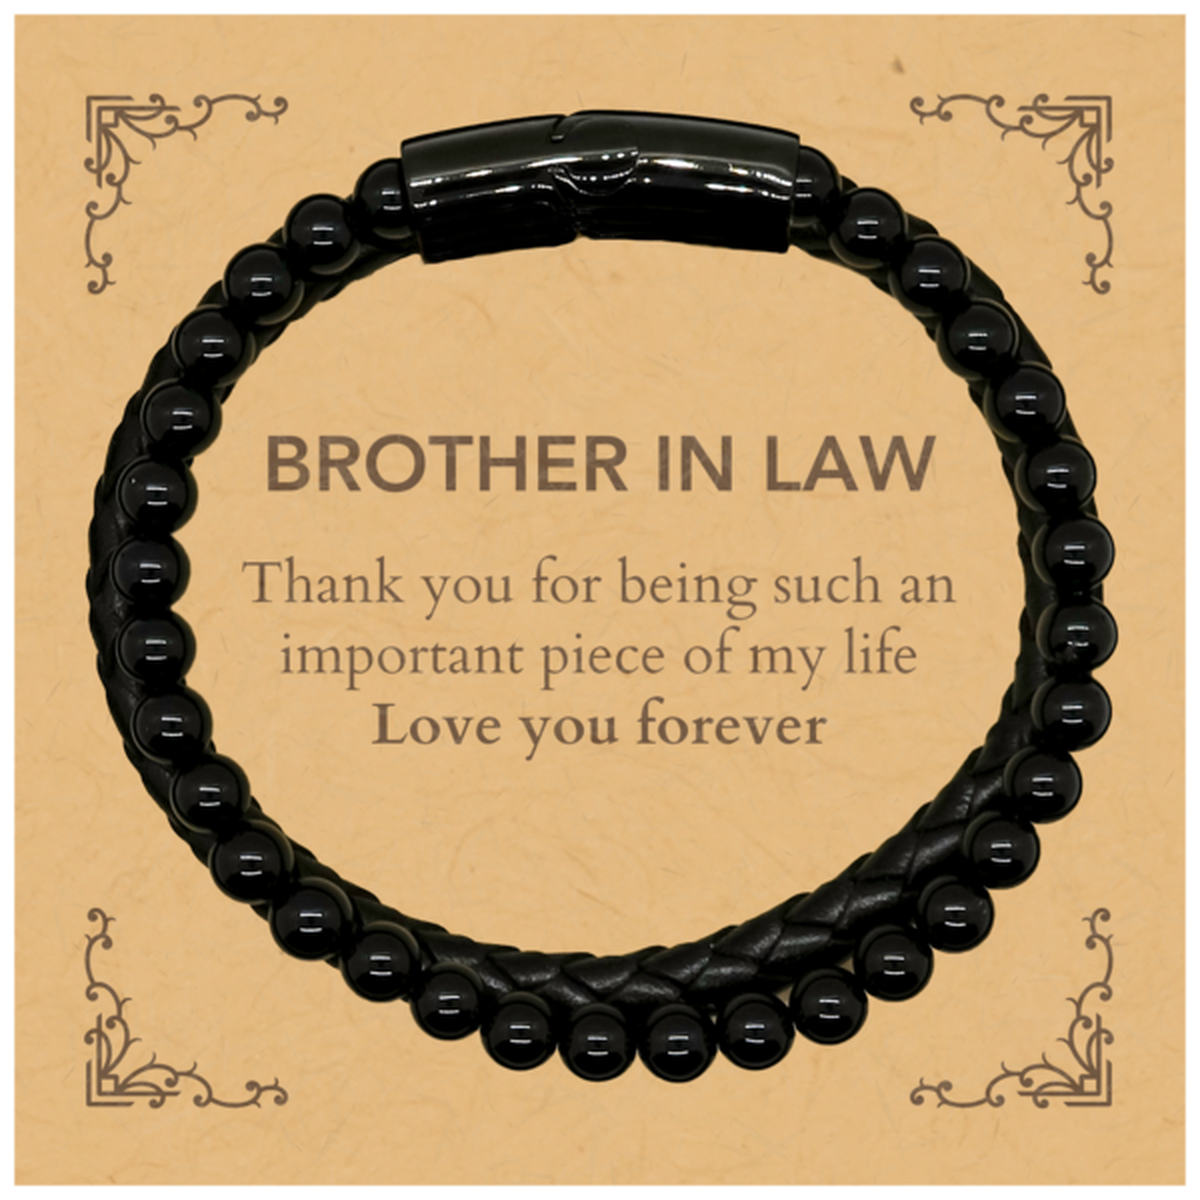 Appropriate Brother In Law Stone Leather Bracelets Epic Birthday Gifts for Brother In Law Thank you for being such an important piece of my life Brother In Law Christmas Mothers Fathers Day